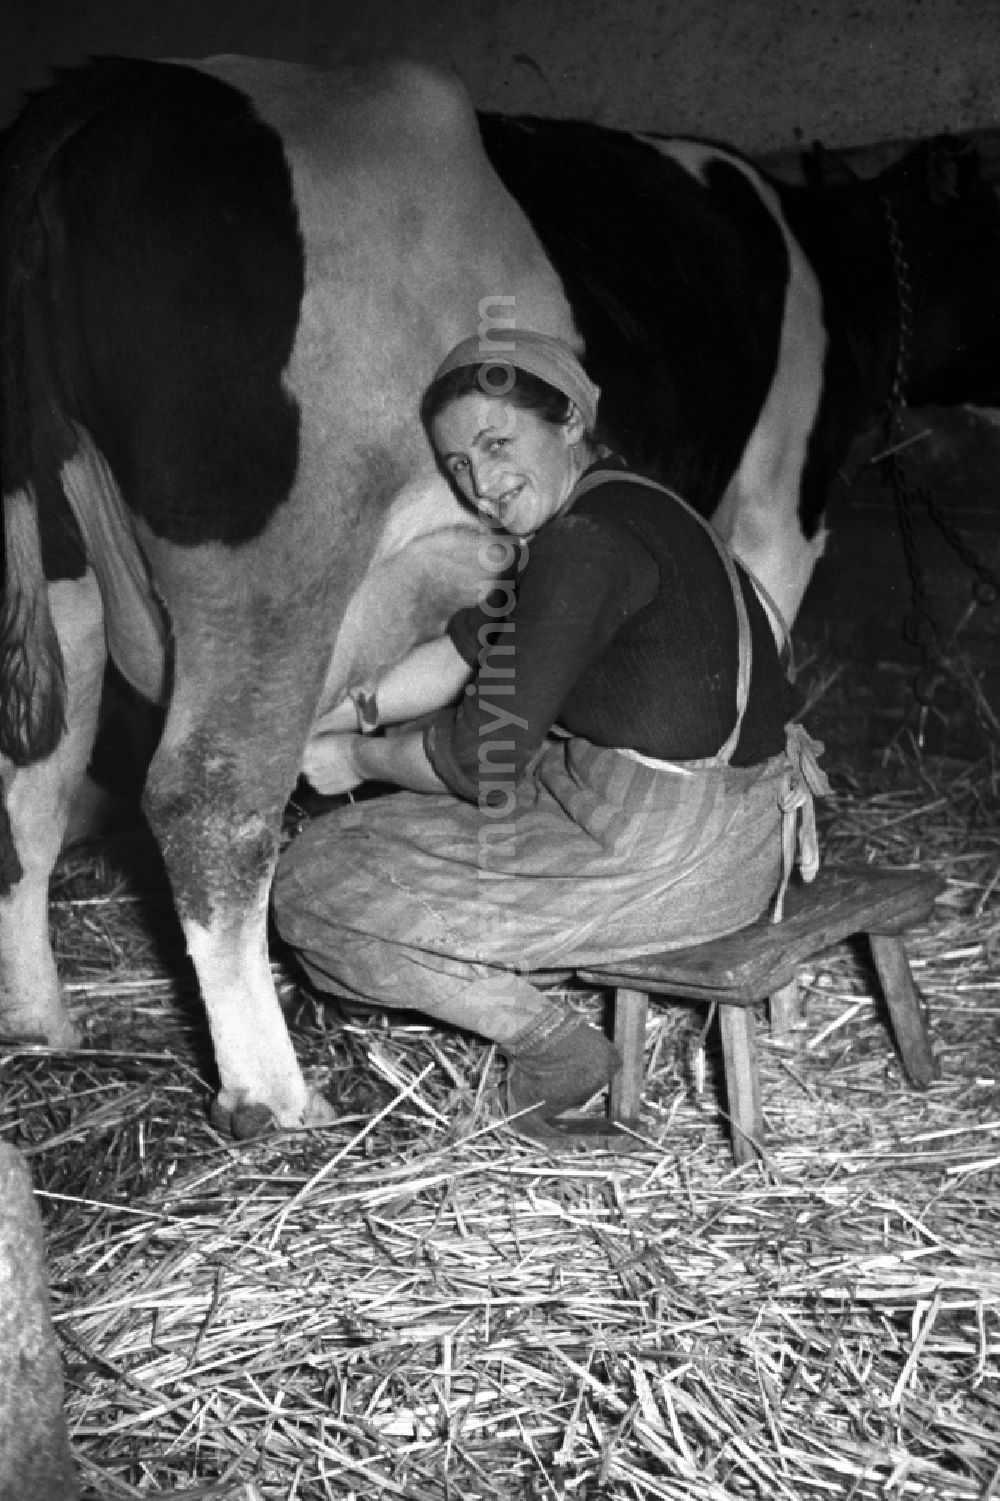 GDR photo archive: Reichstädt - Milk production work on a farm in Reichstaedt in the state Thuringia on the territory of the former GDR, German Democratic Republic